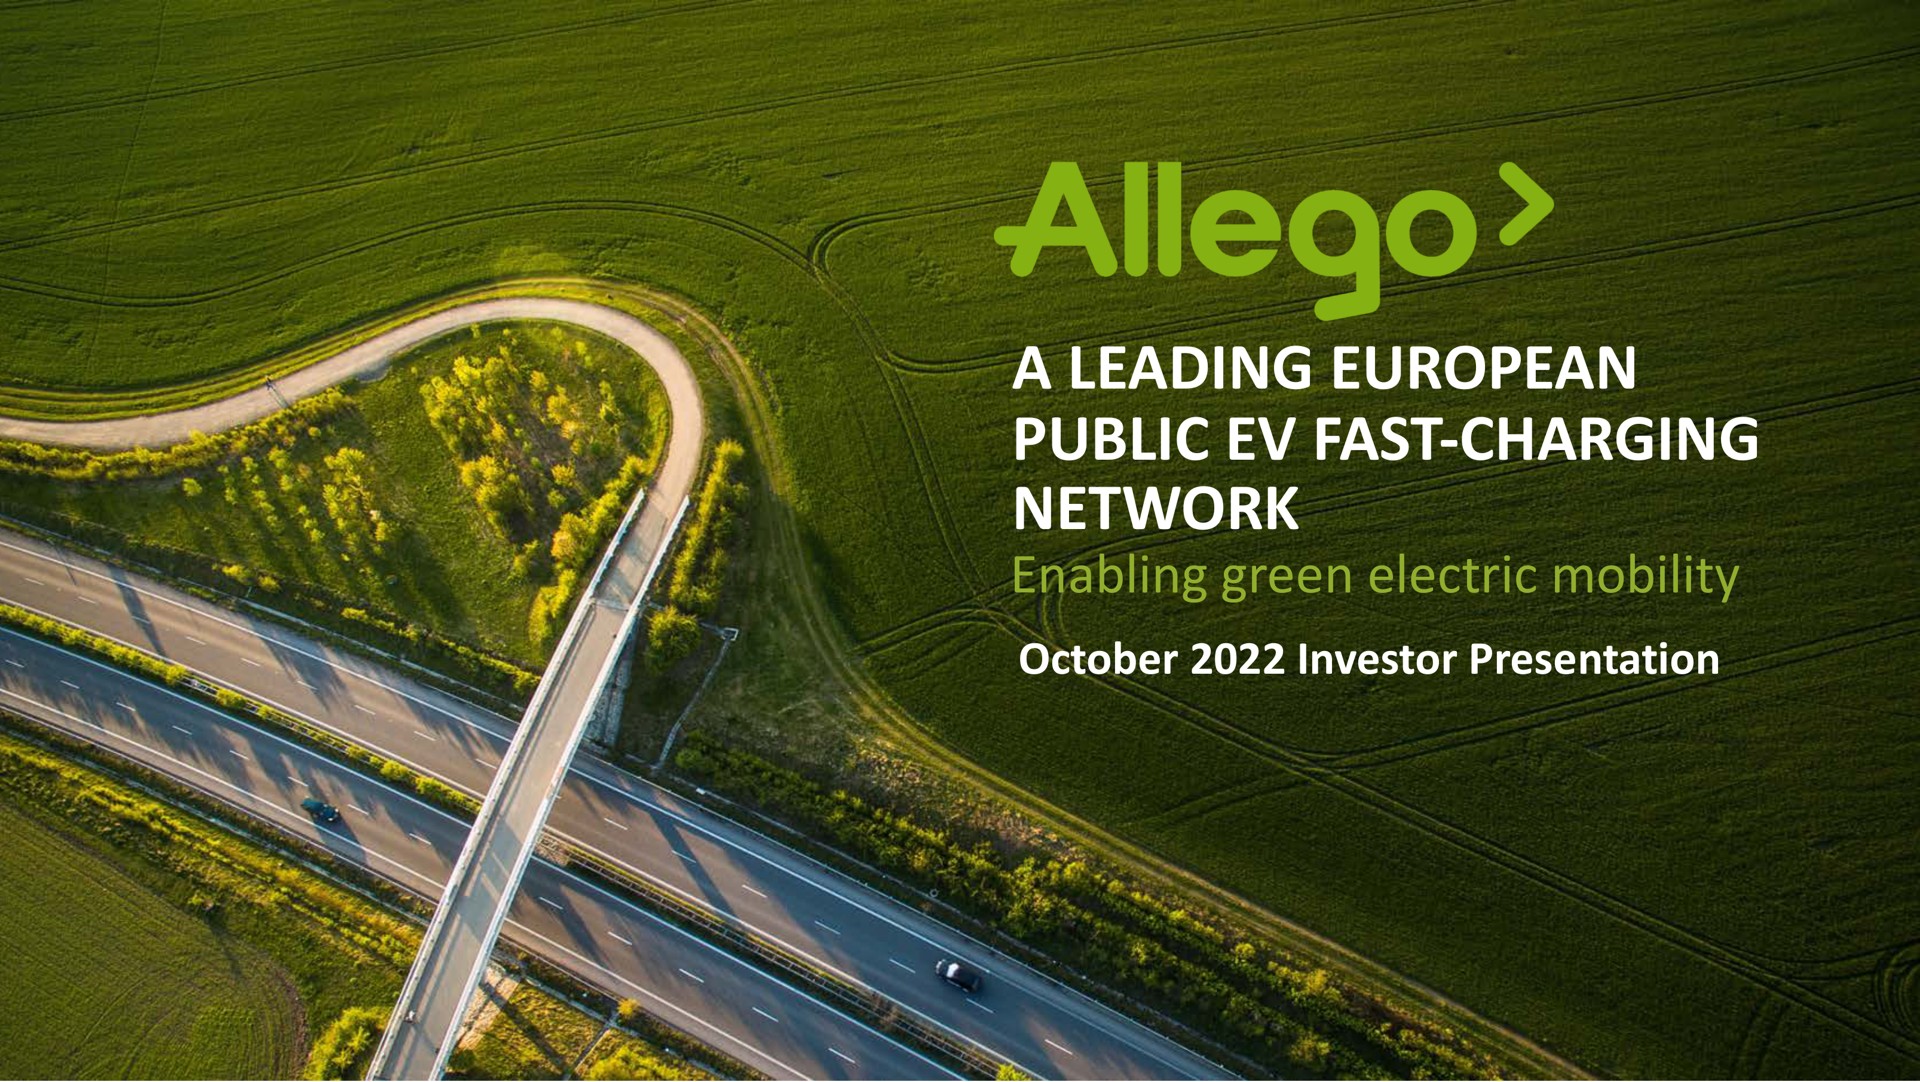 a leading public fast charging network enabling green electric mobility | Allego